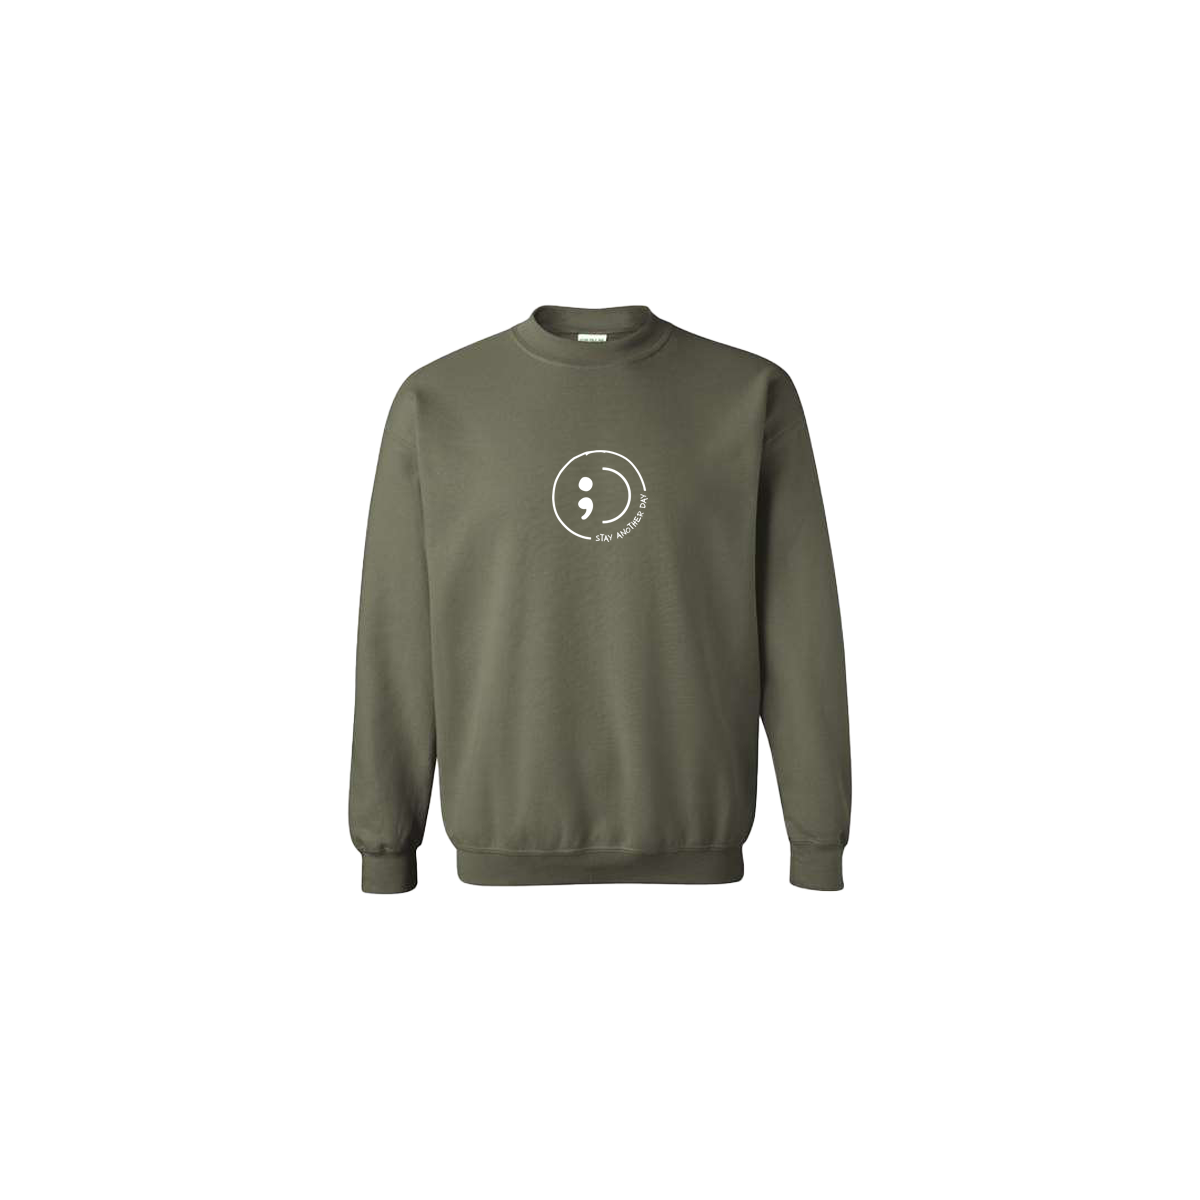 Stay Another Day Smiley with text Embroidered ArmyGreen Crewneck - Mental Health Awareness Clothing